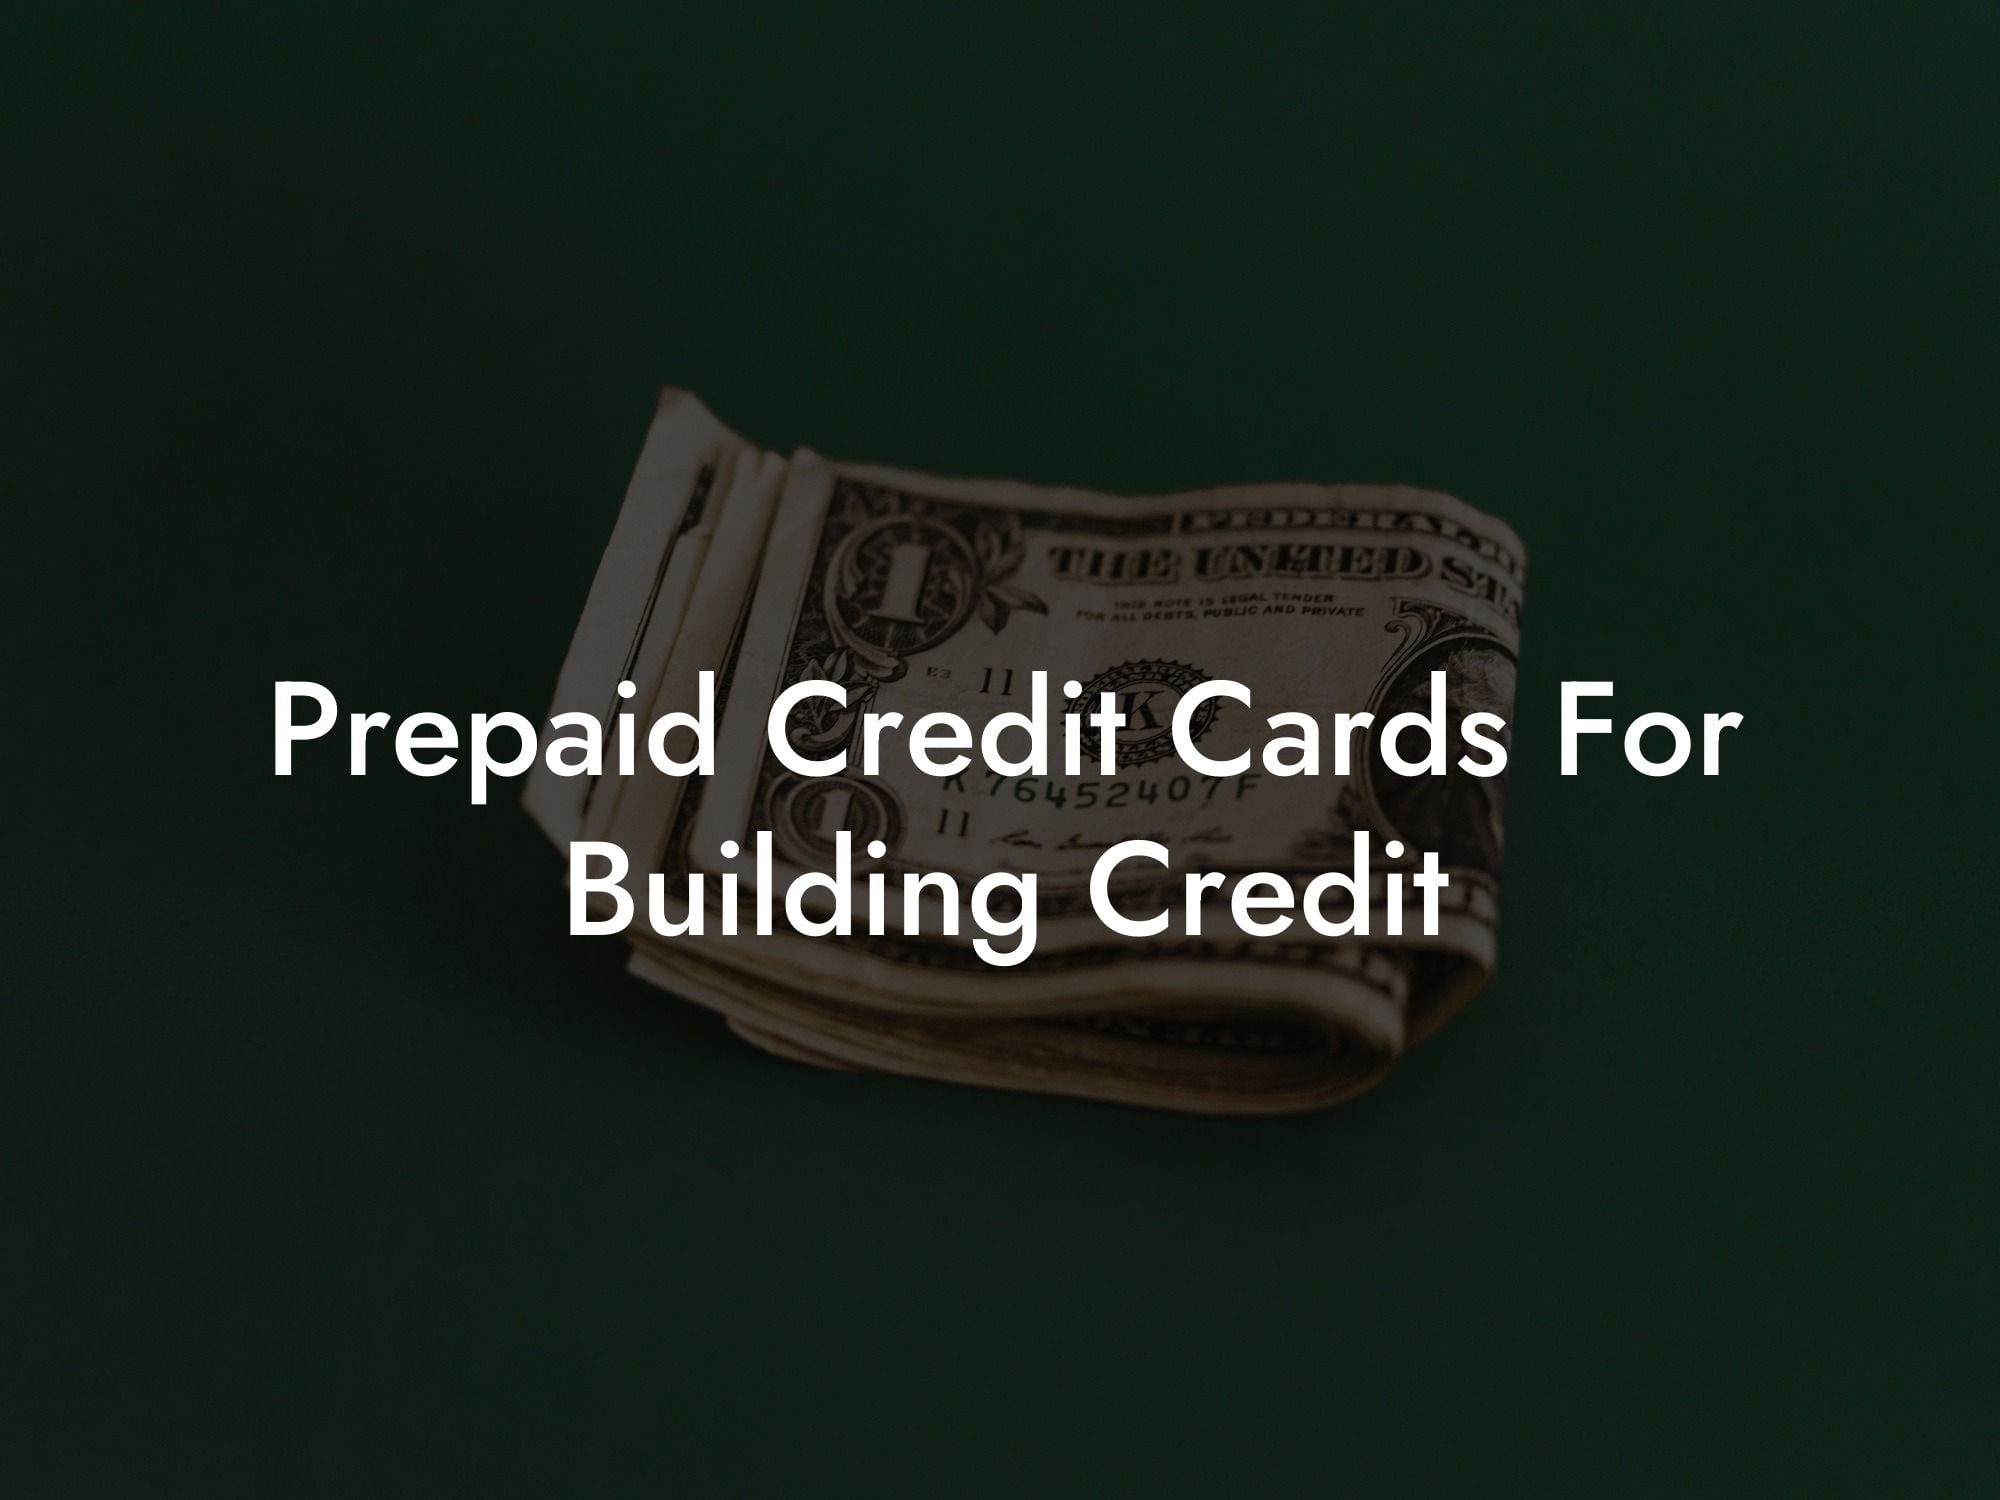 Prepaid Credit Cards For Building Credit